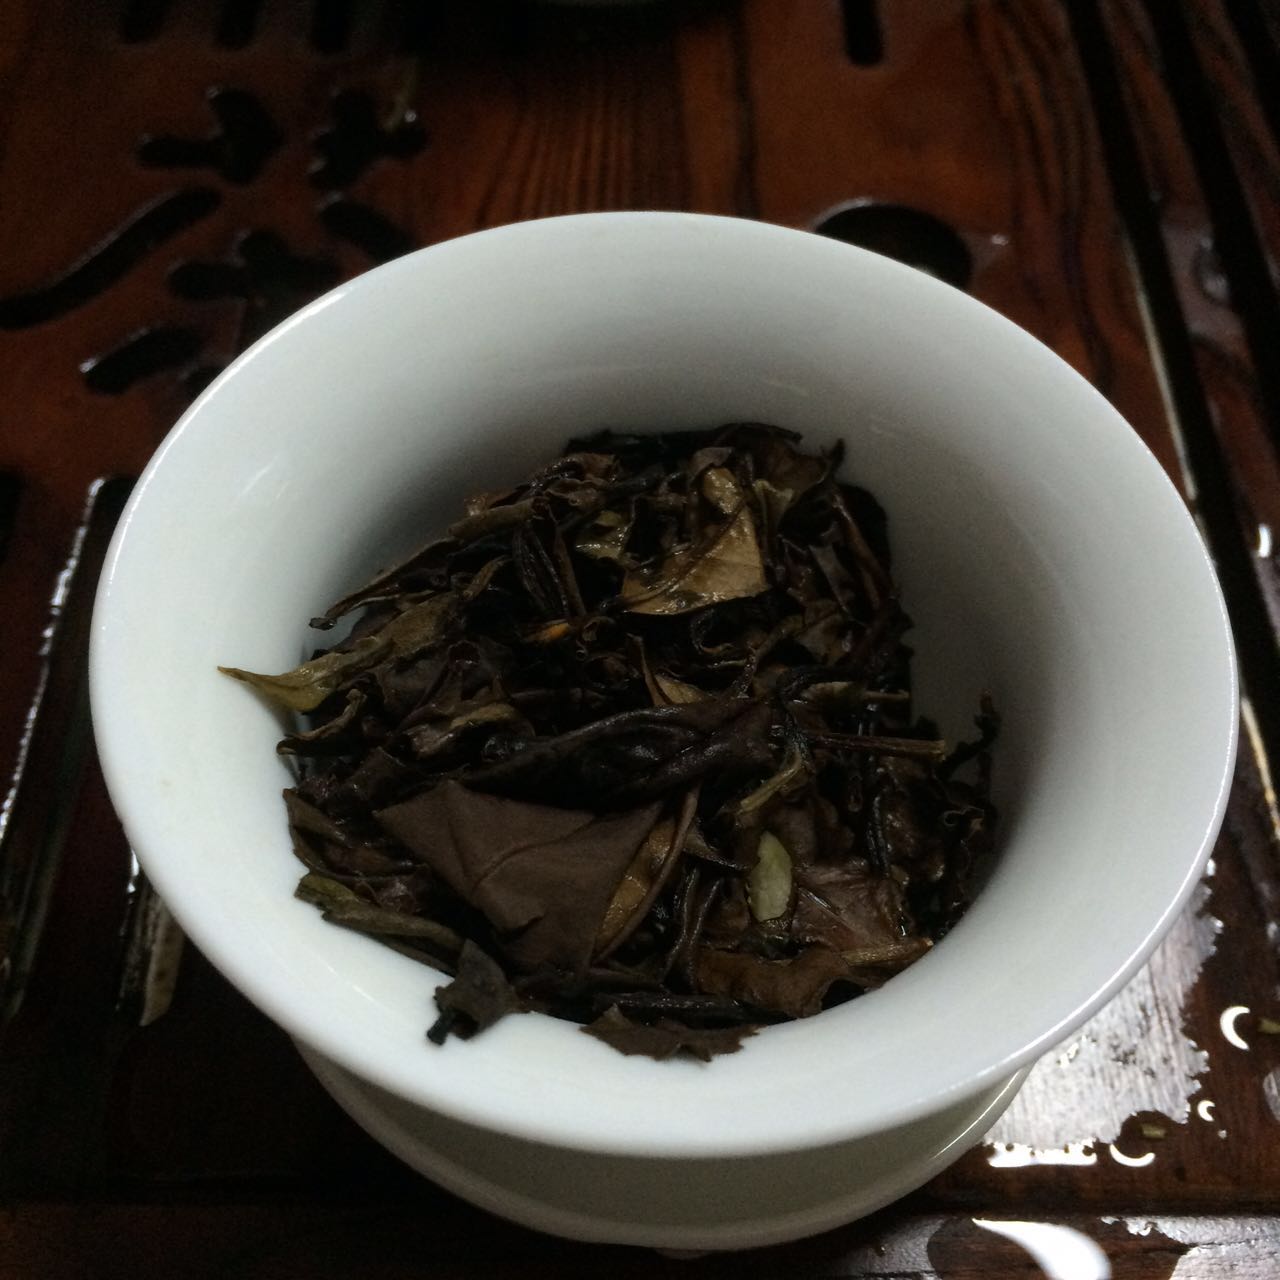 In 2013, Lao Shoumei Fuding White Tea with full fragrance and authentic origin is safe and healthy.